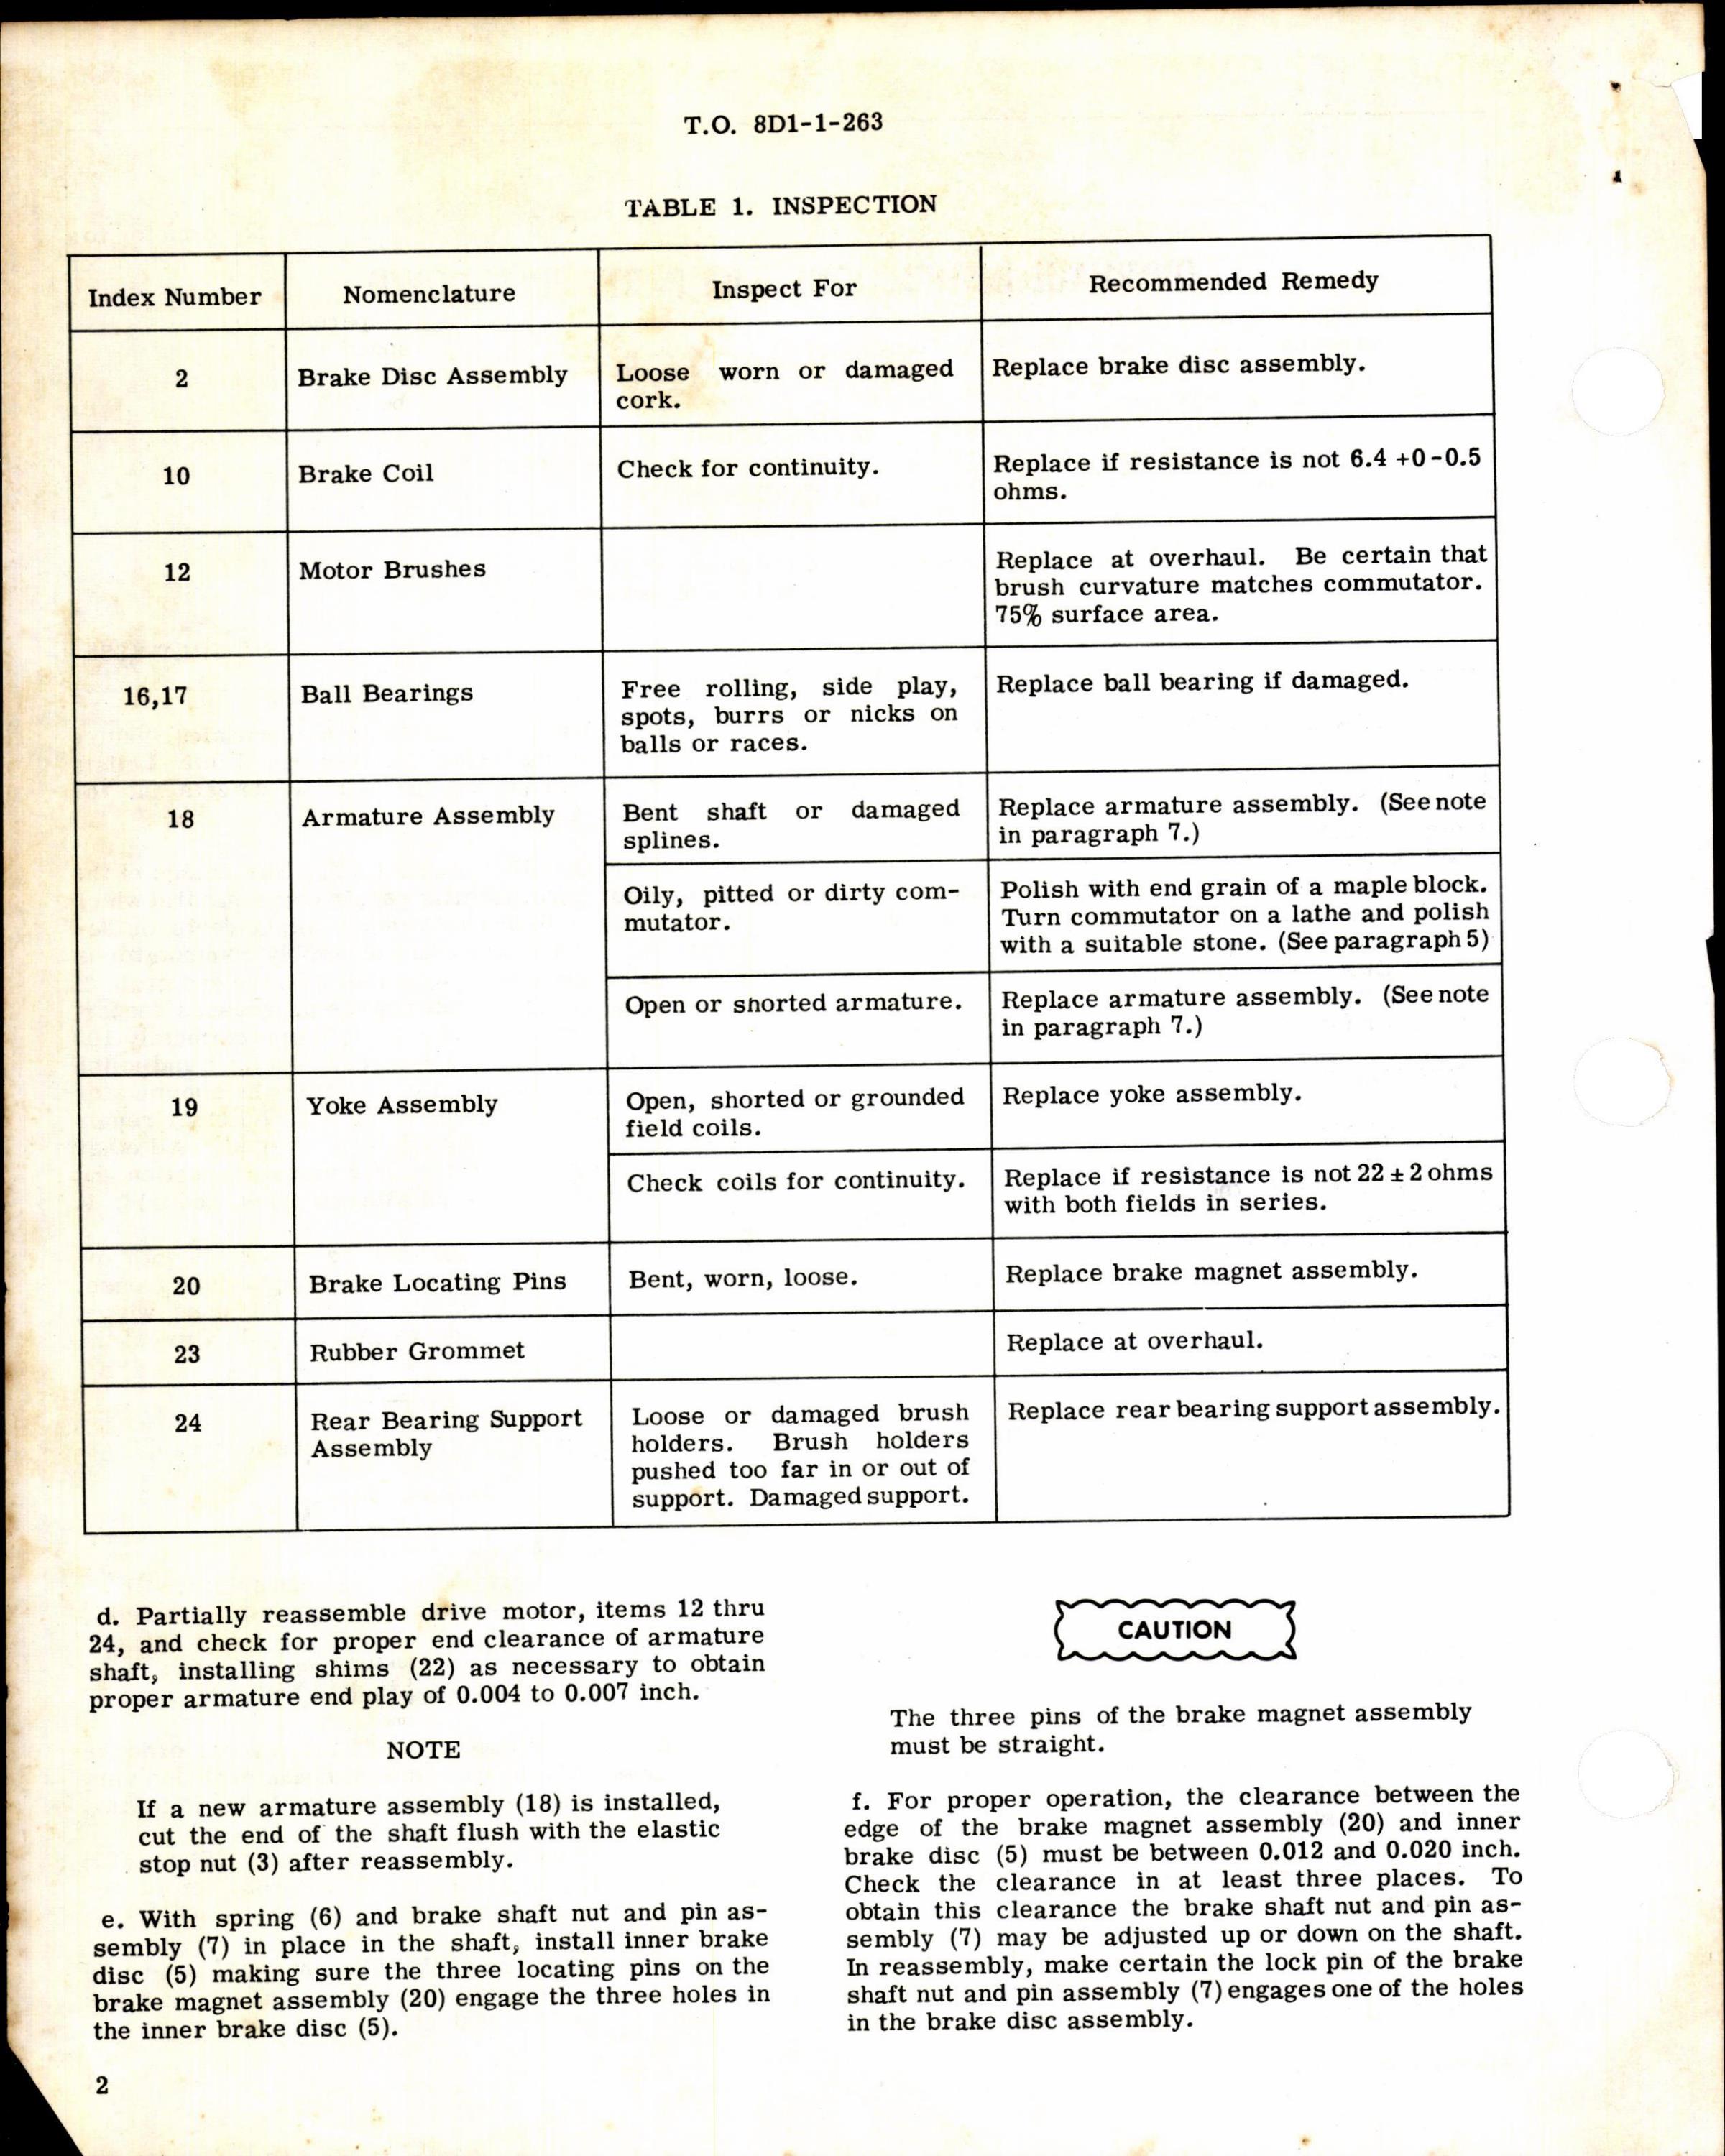 Sample page 2 from AirCorps Library document: Overhaul Instructions with Parts Breakdown for Drive Motor AYLC 568-1